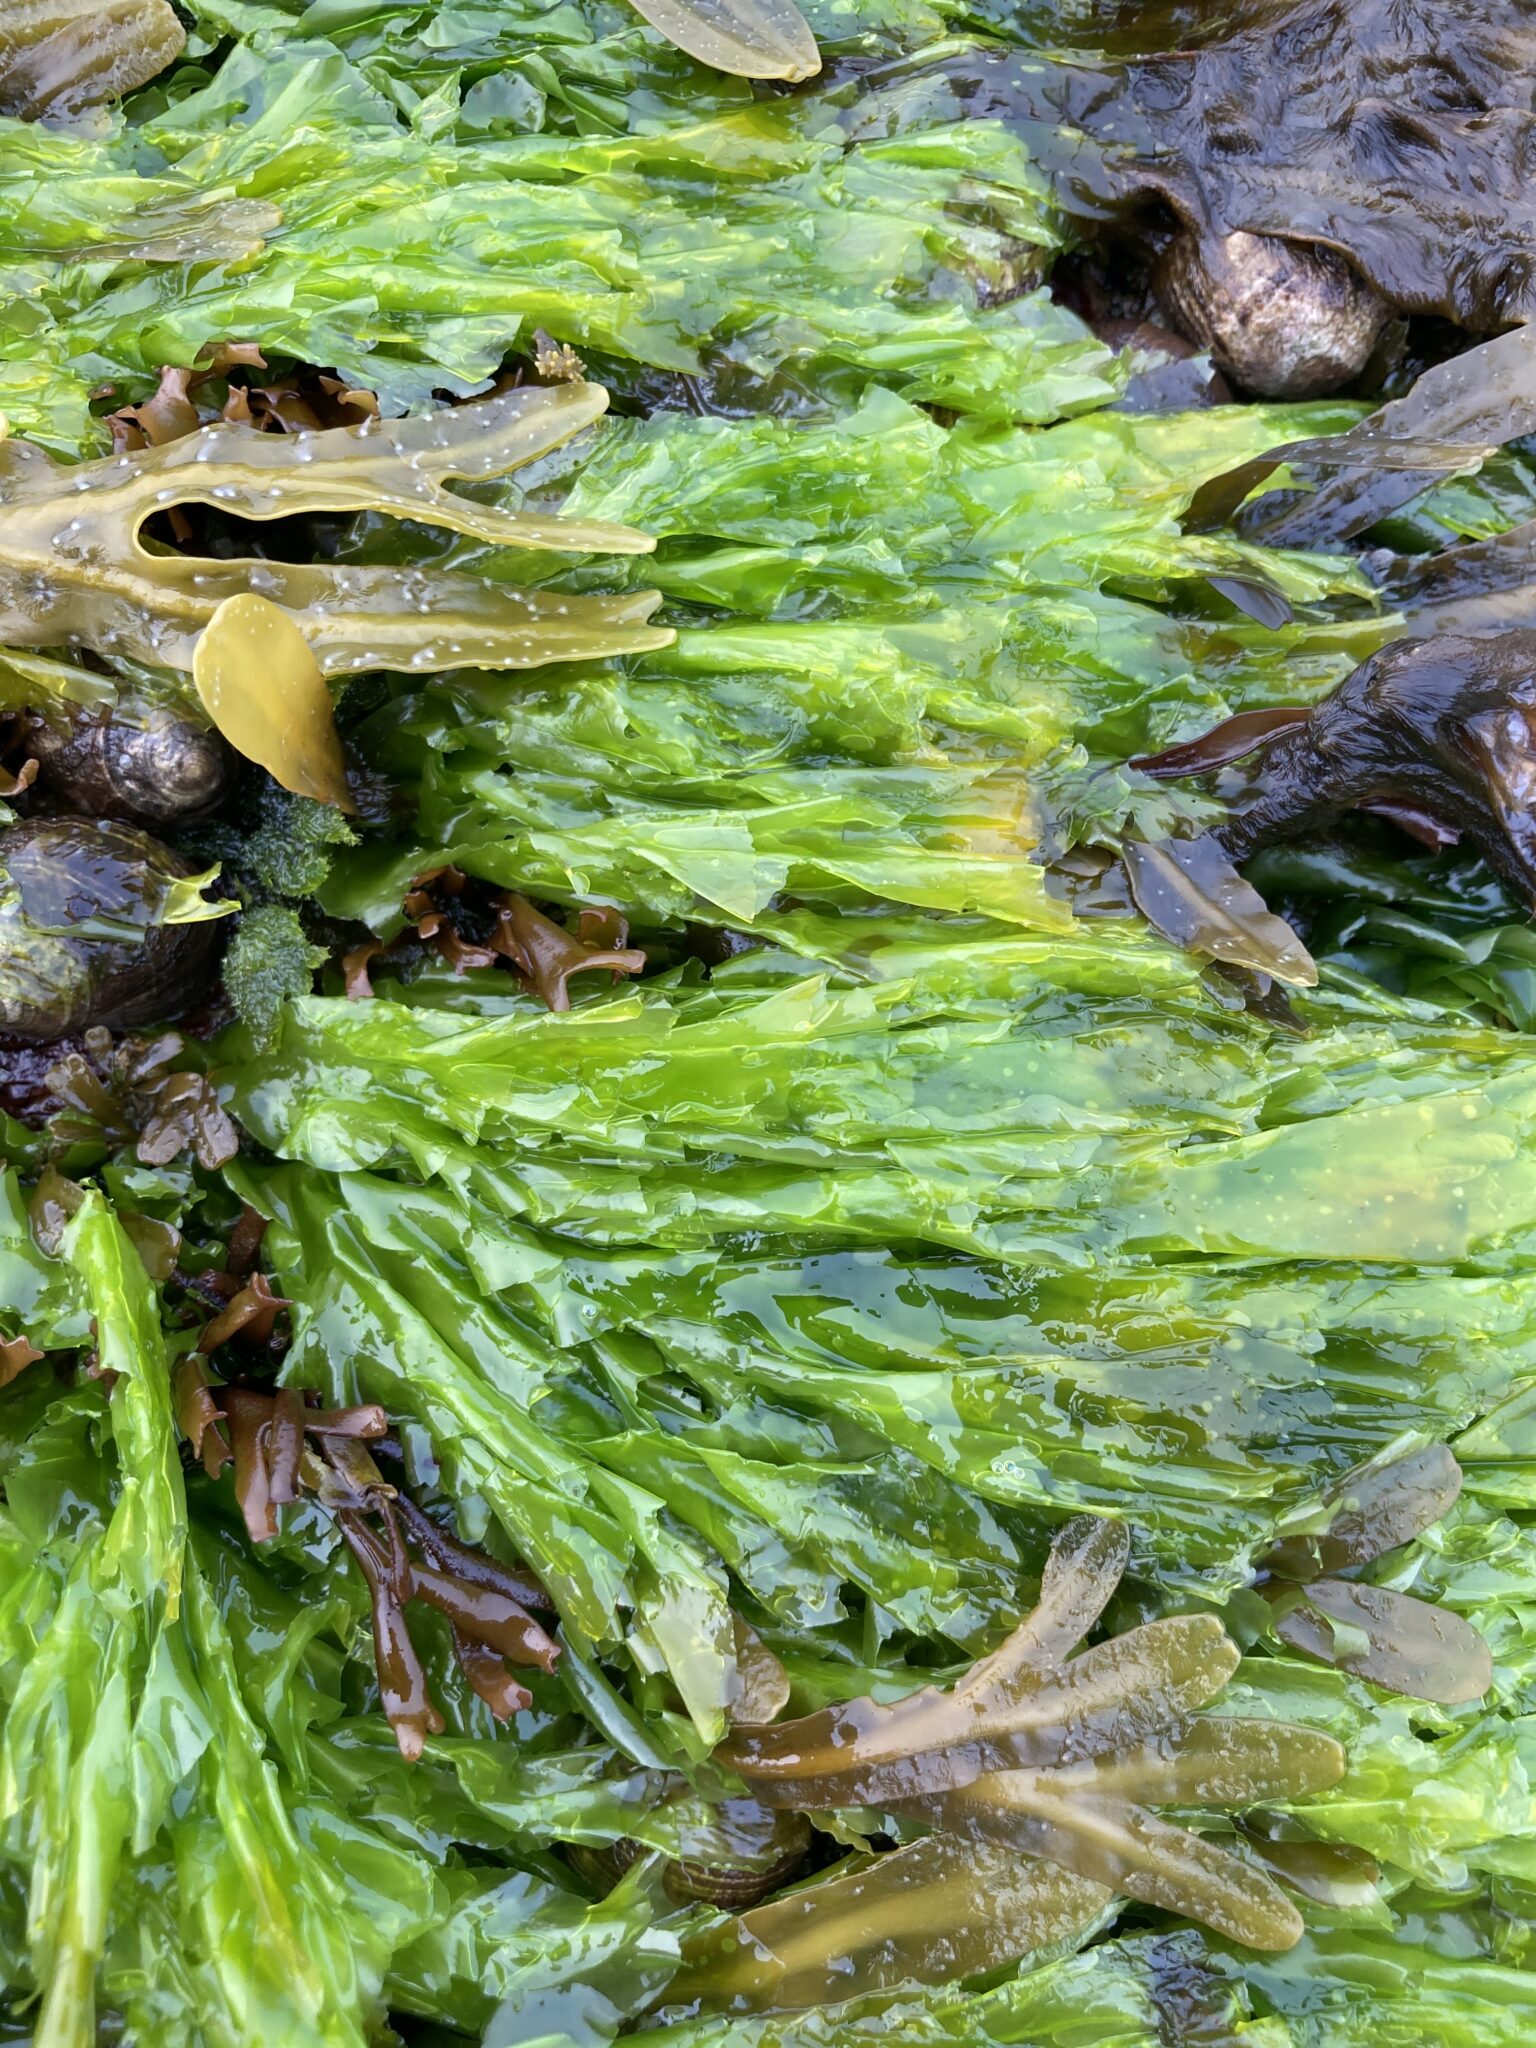 Close-up view of seaweed from Inner Bar Island.